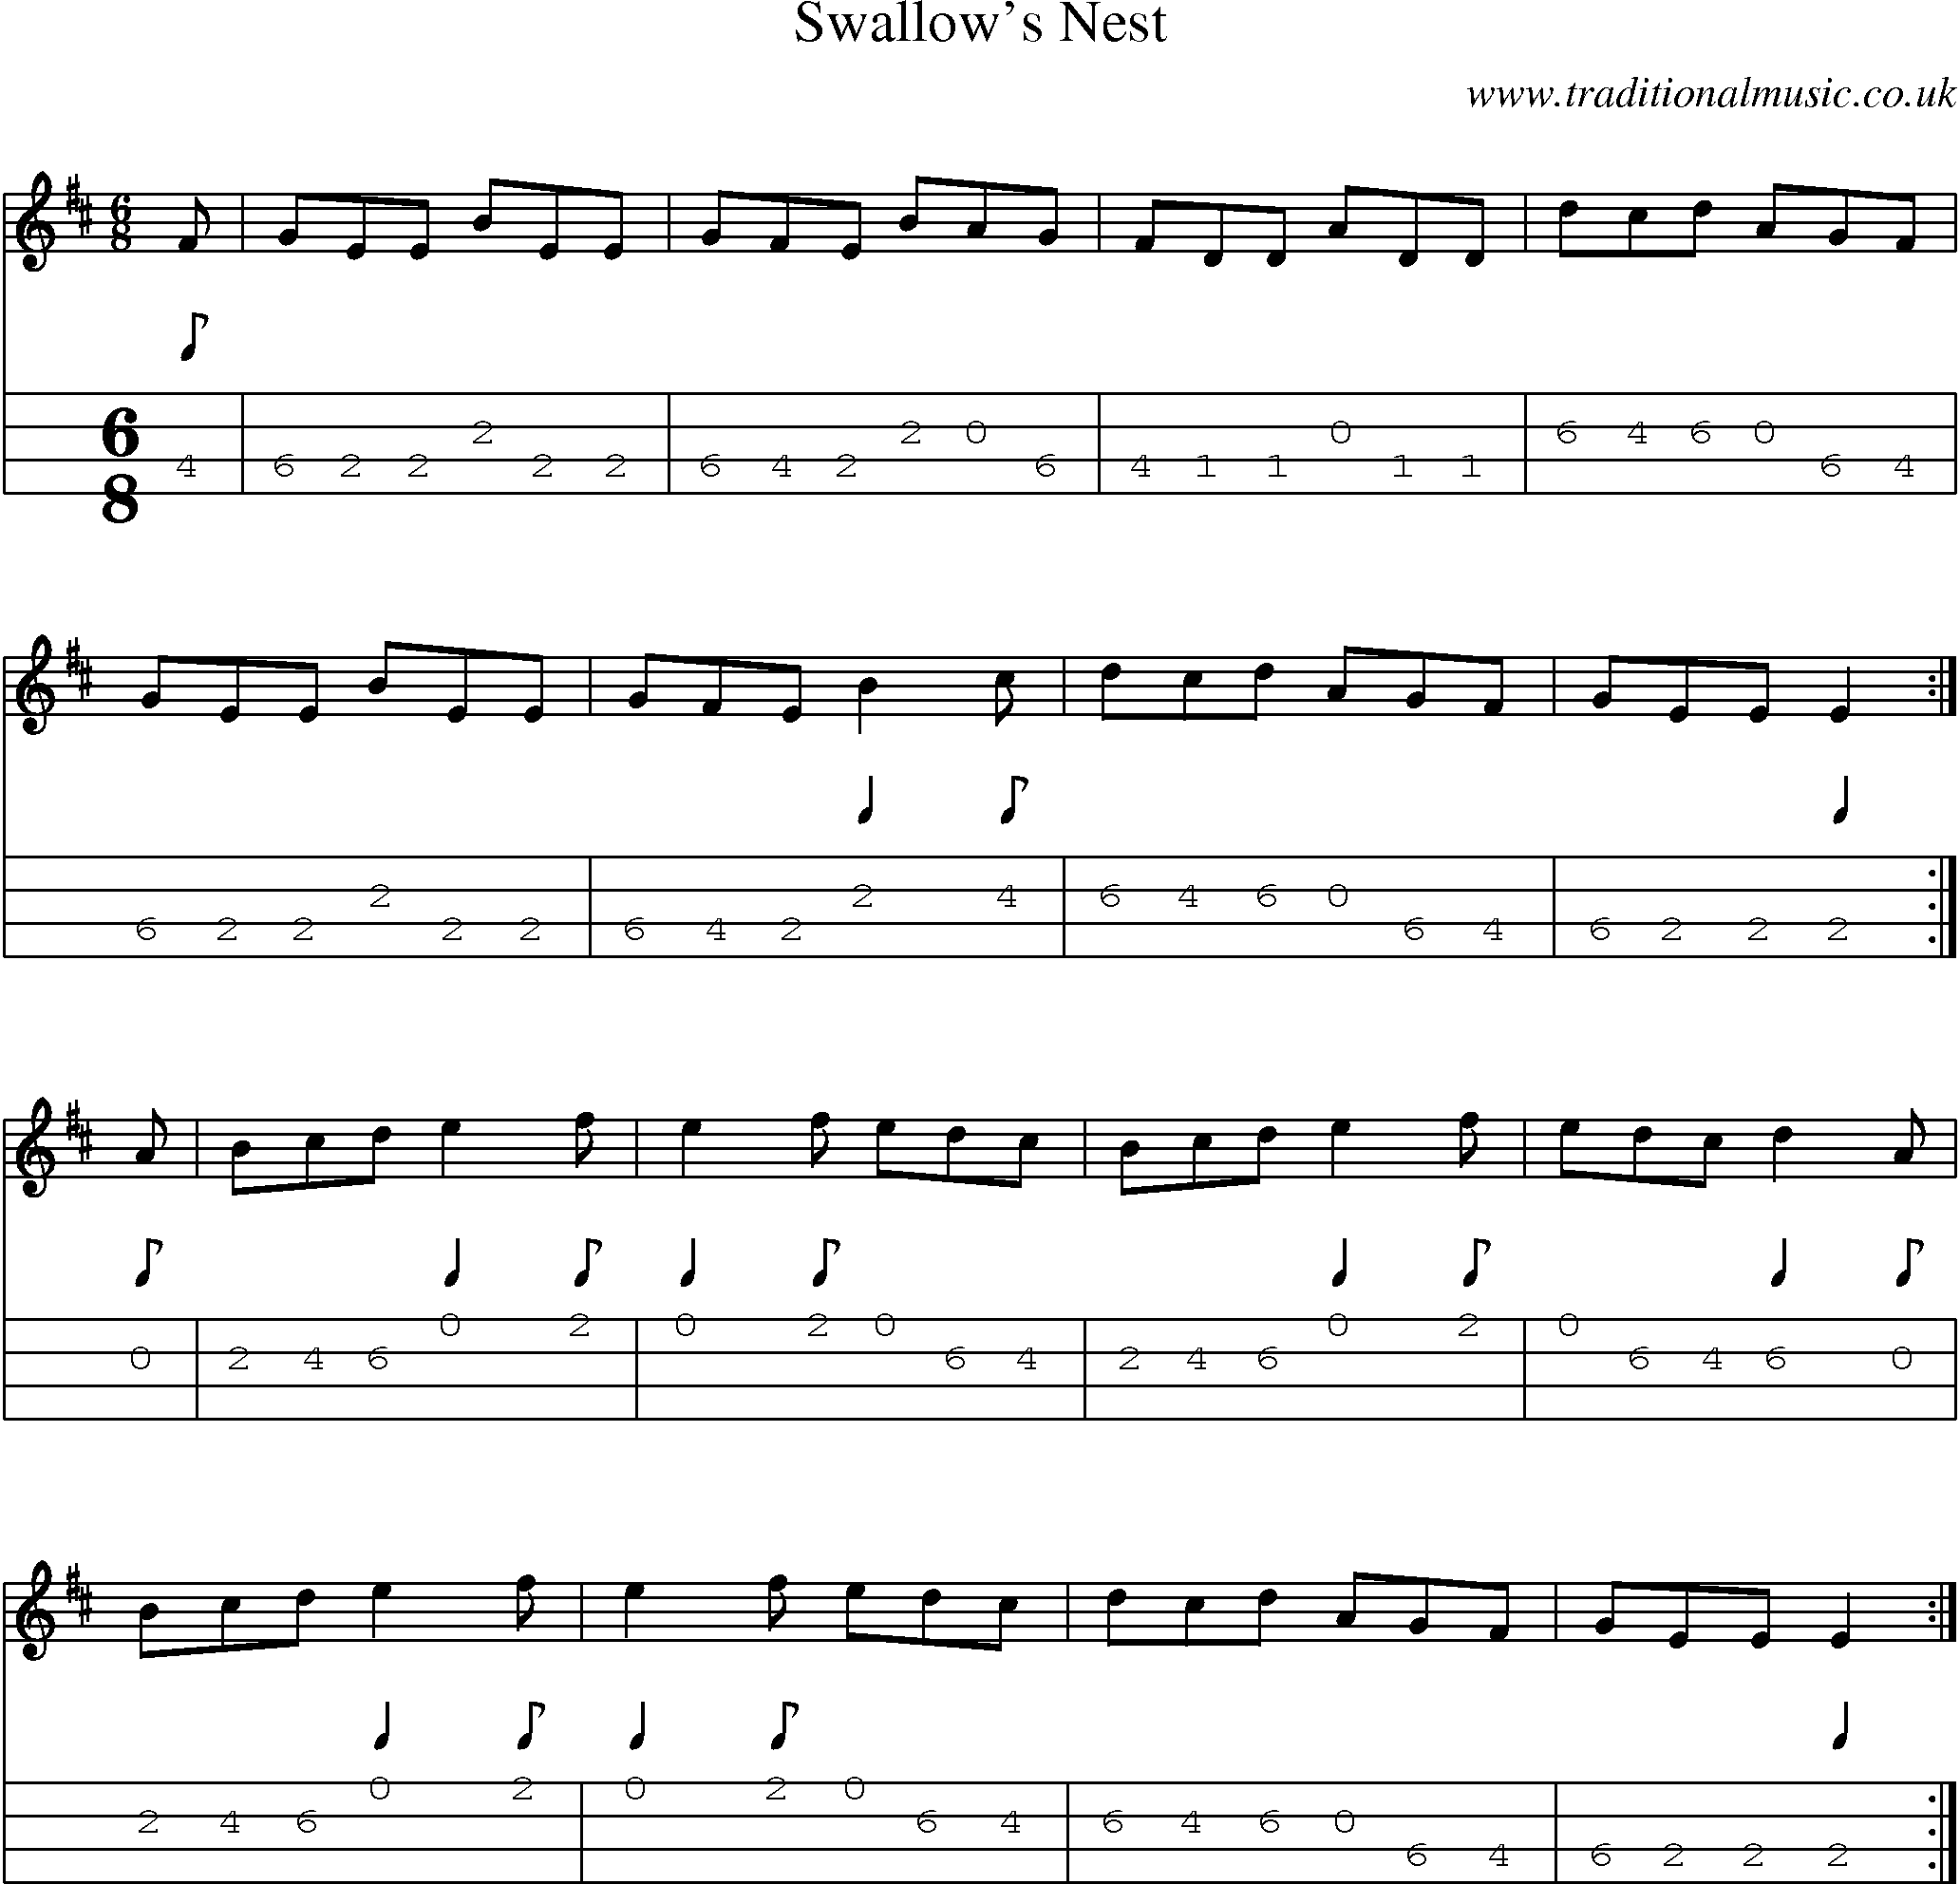 Music Score and Mandolin Tabs for Swallows Nest